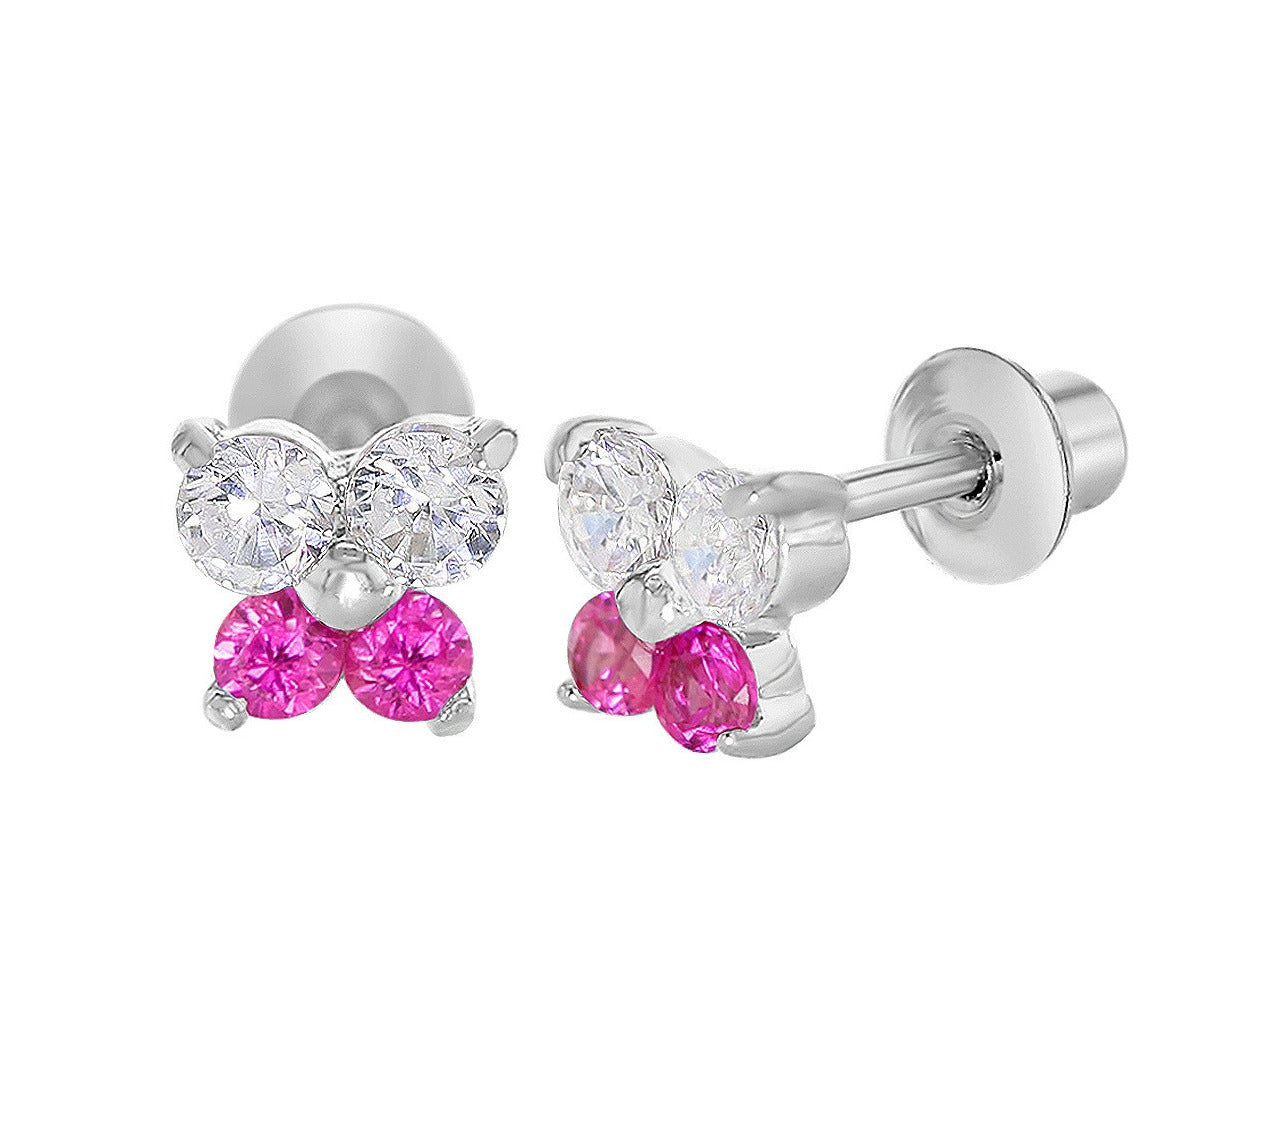 Baby and Children's Earrings:  18k White Gold Filled, White and Pink CZ Butterflies with Screw Backs